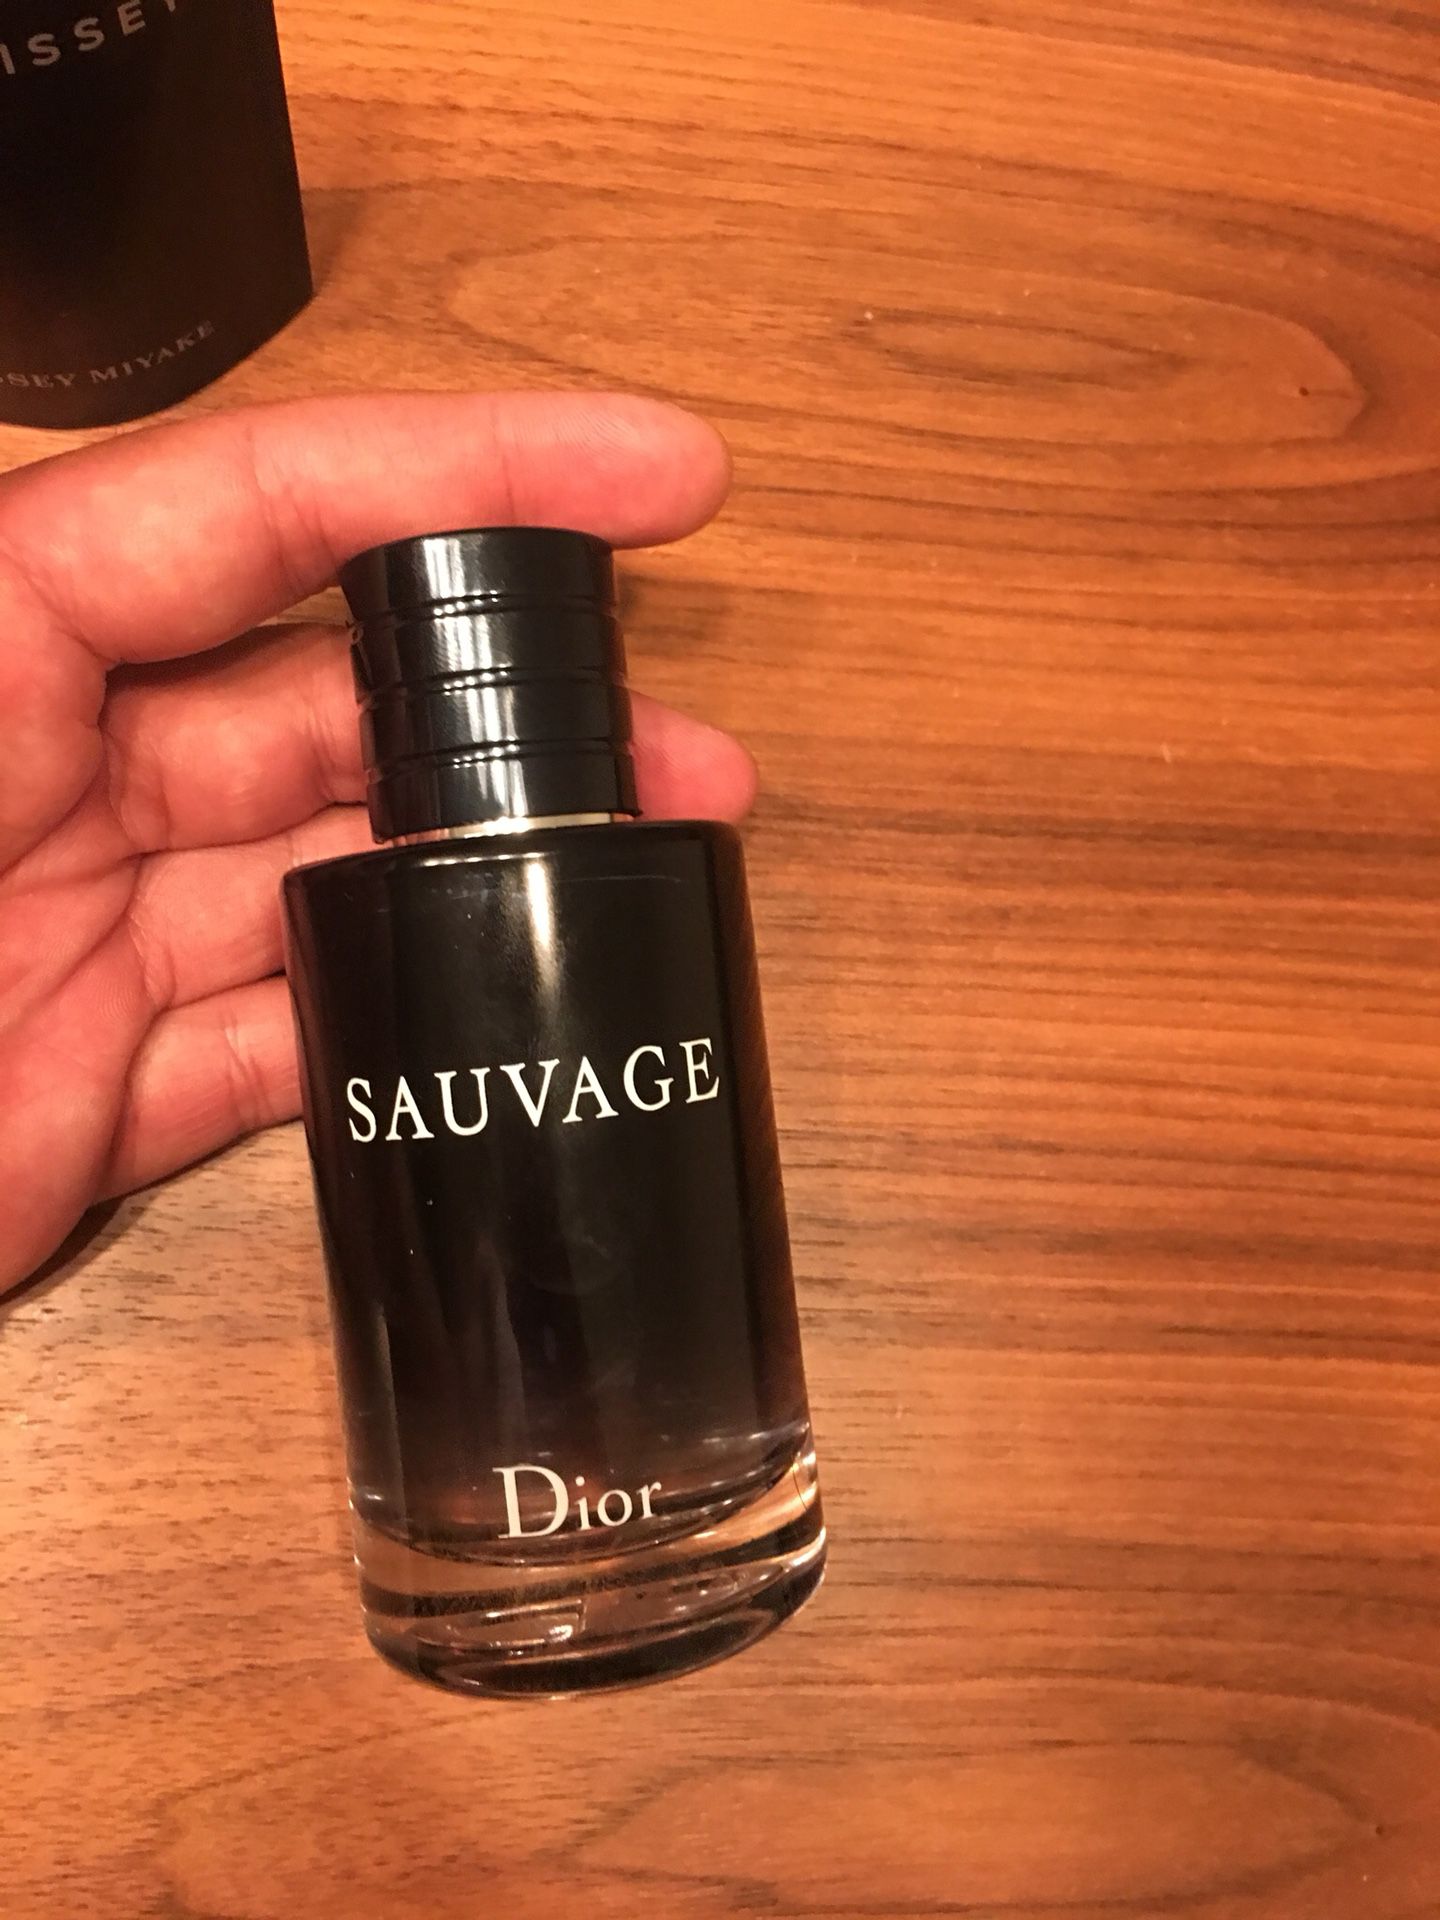 Dior Sauvage Men’s Cologne 3.4 oz — used like new